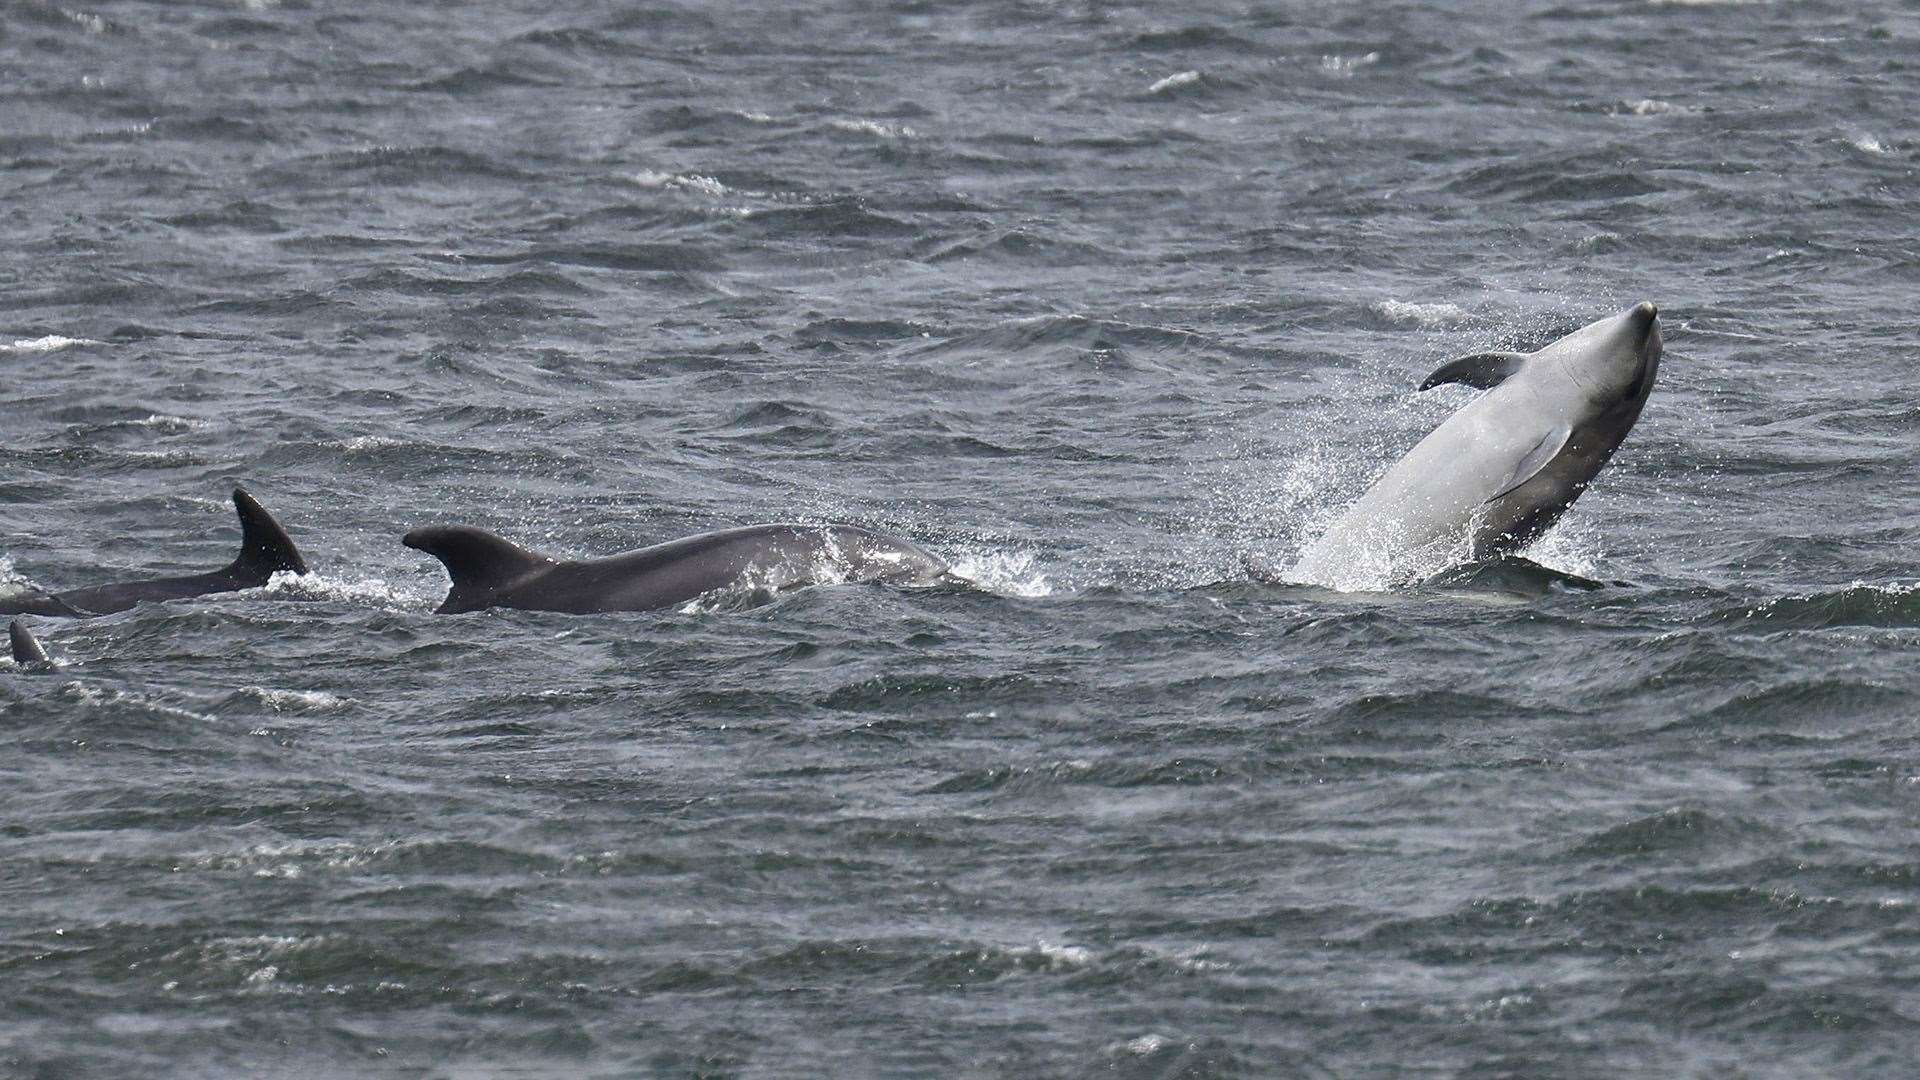 The dolphins finally headed back into the open sea. Picture: WDC/Charlie Phillips.